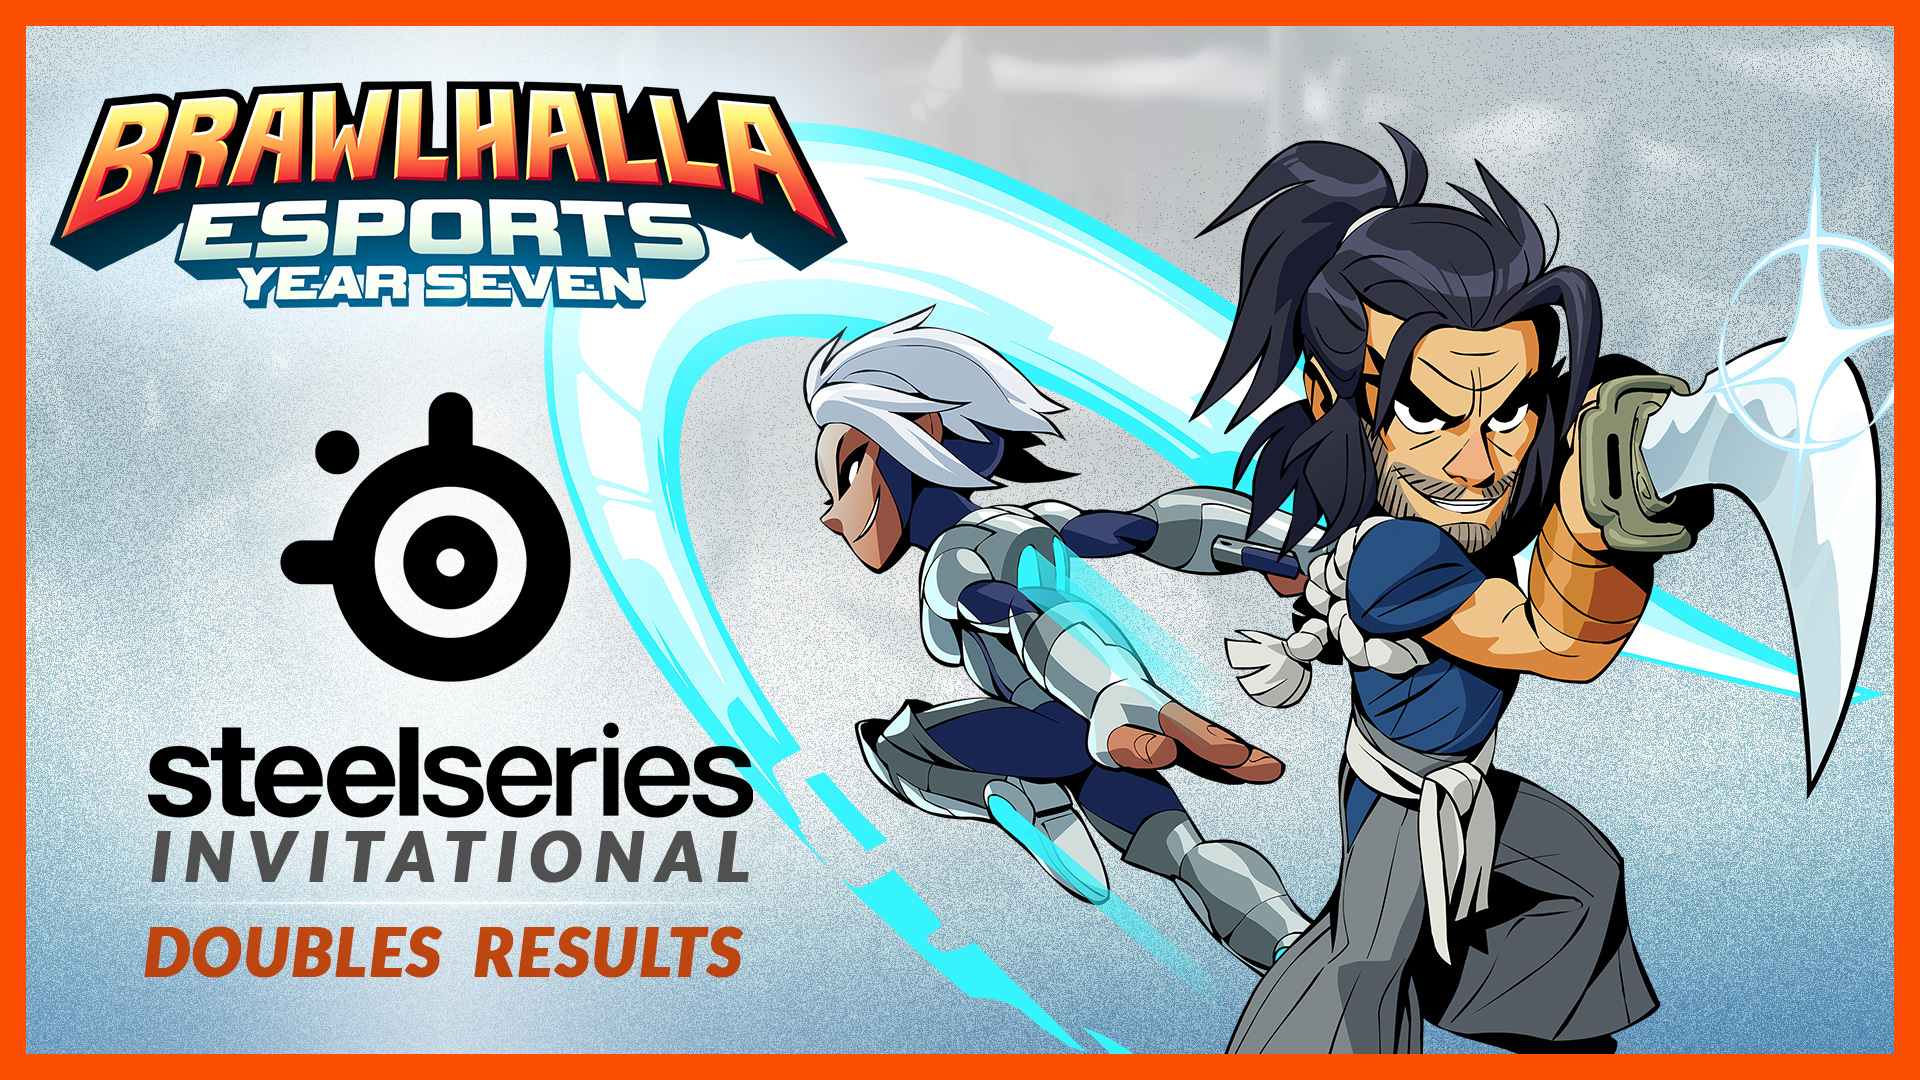 Prime Gaming on X: Jump into the F2P arena of @Brawlhalla with a